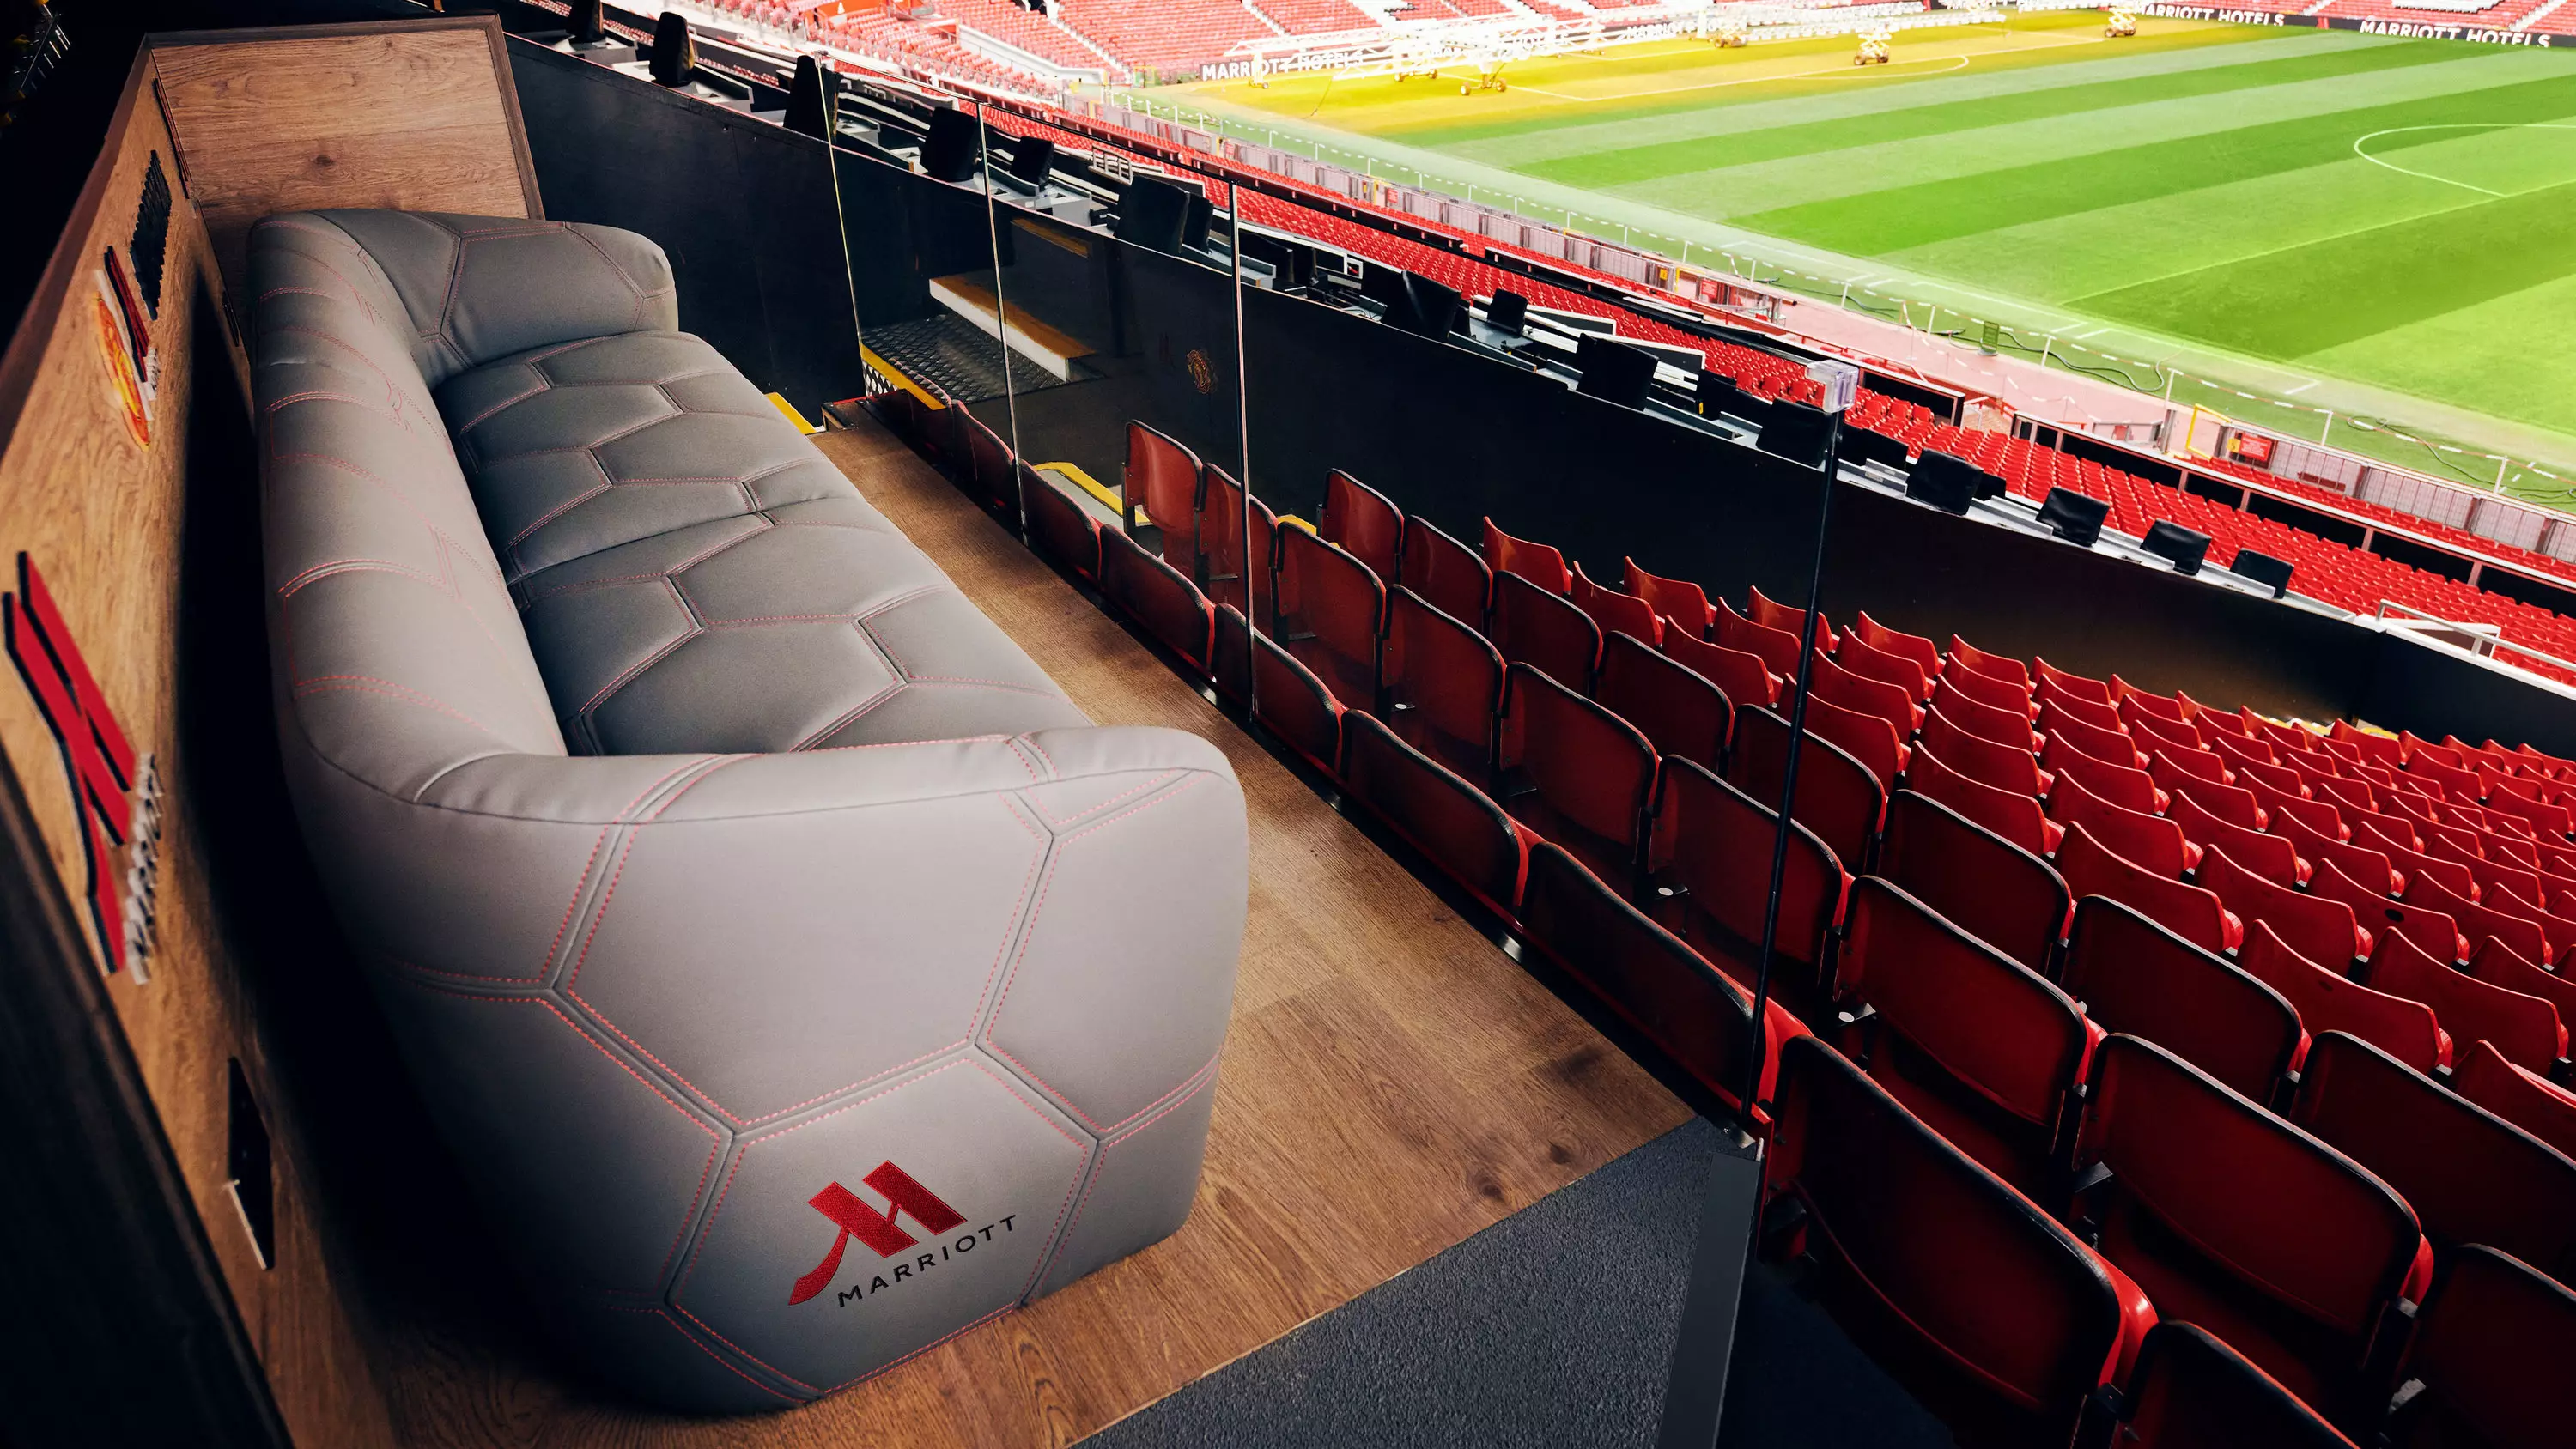 Manchester United Officially Unveil The New 'Seat of Dreams' At Old Trafford